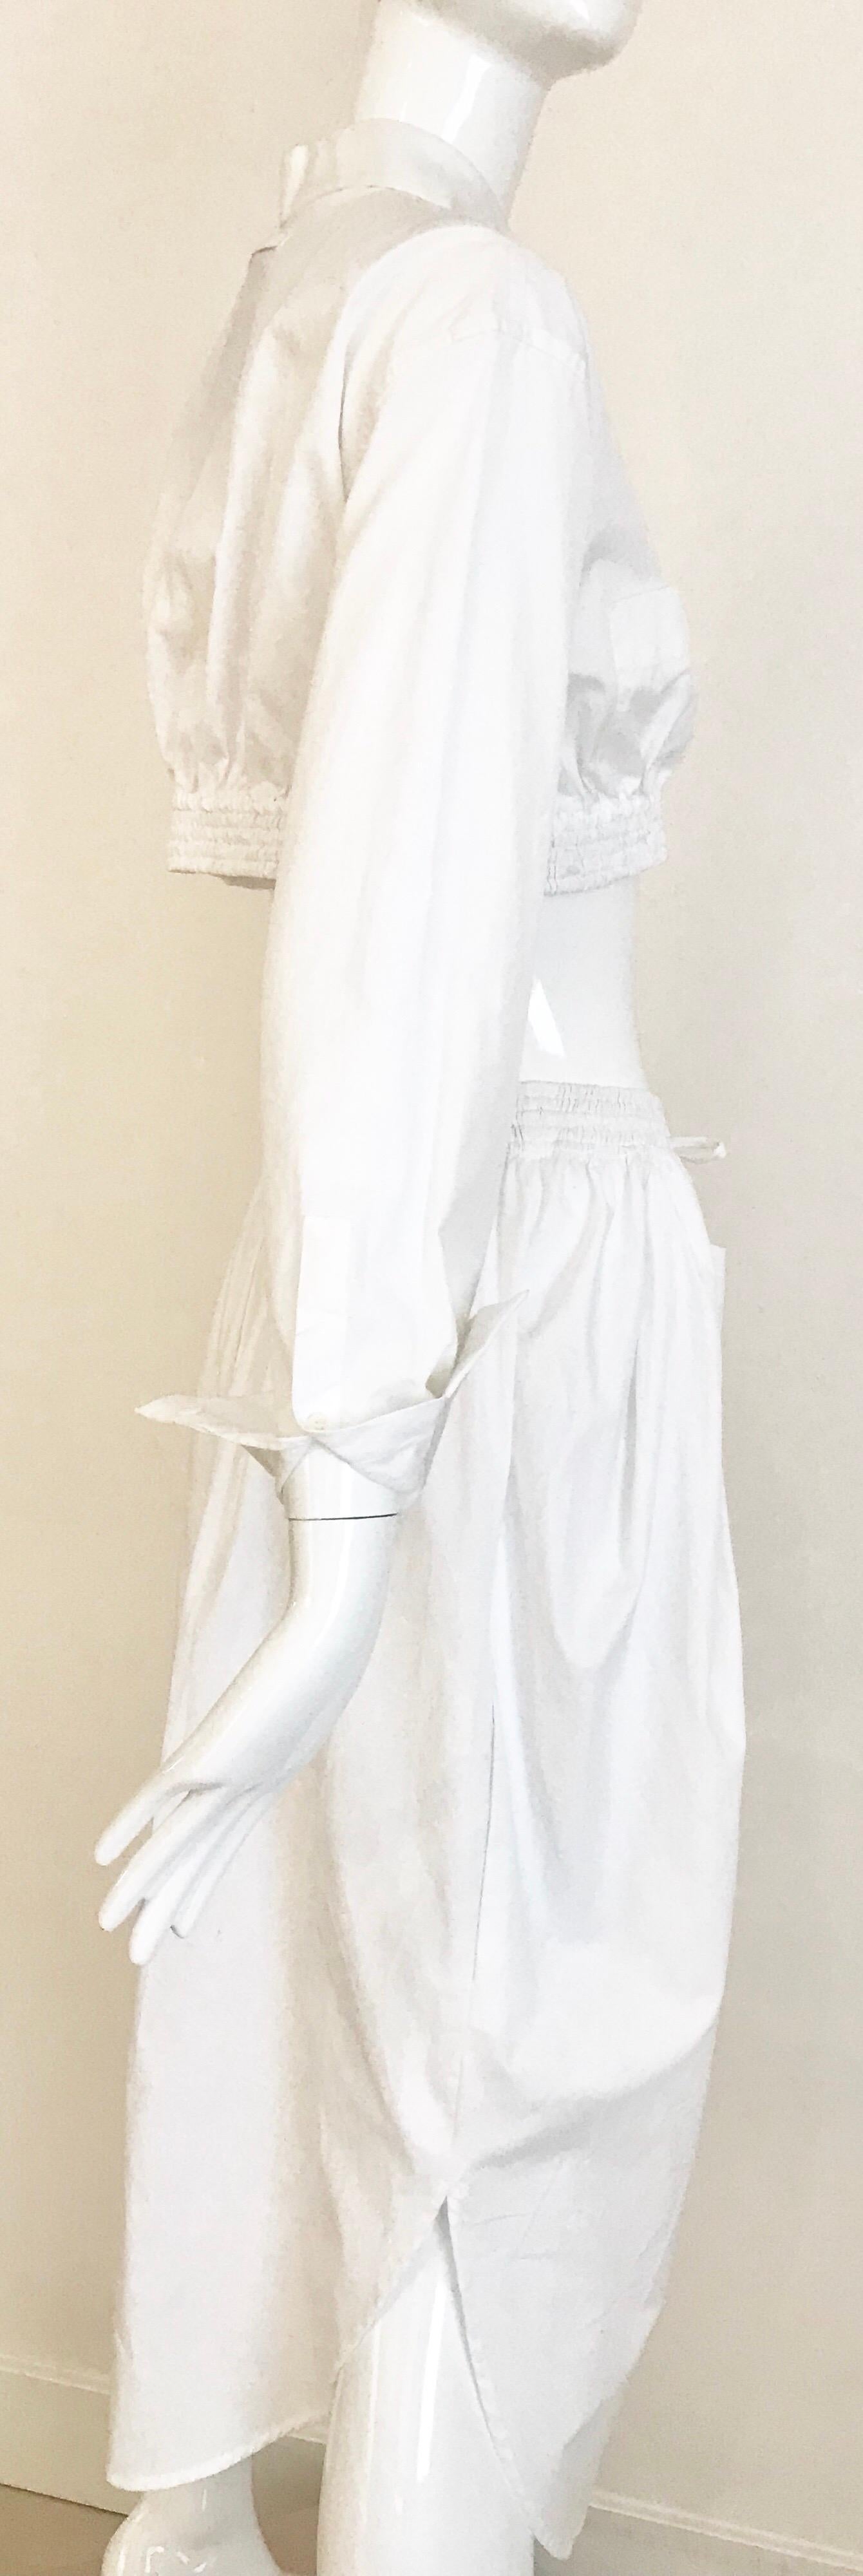 Jean Paul Gaultier White Cotton Crop Top and Skirt 4